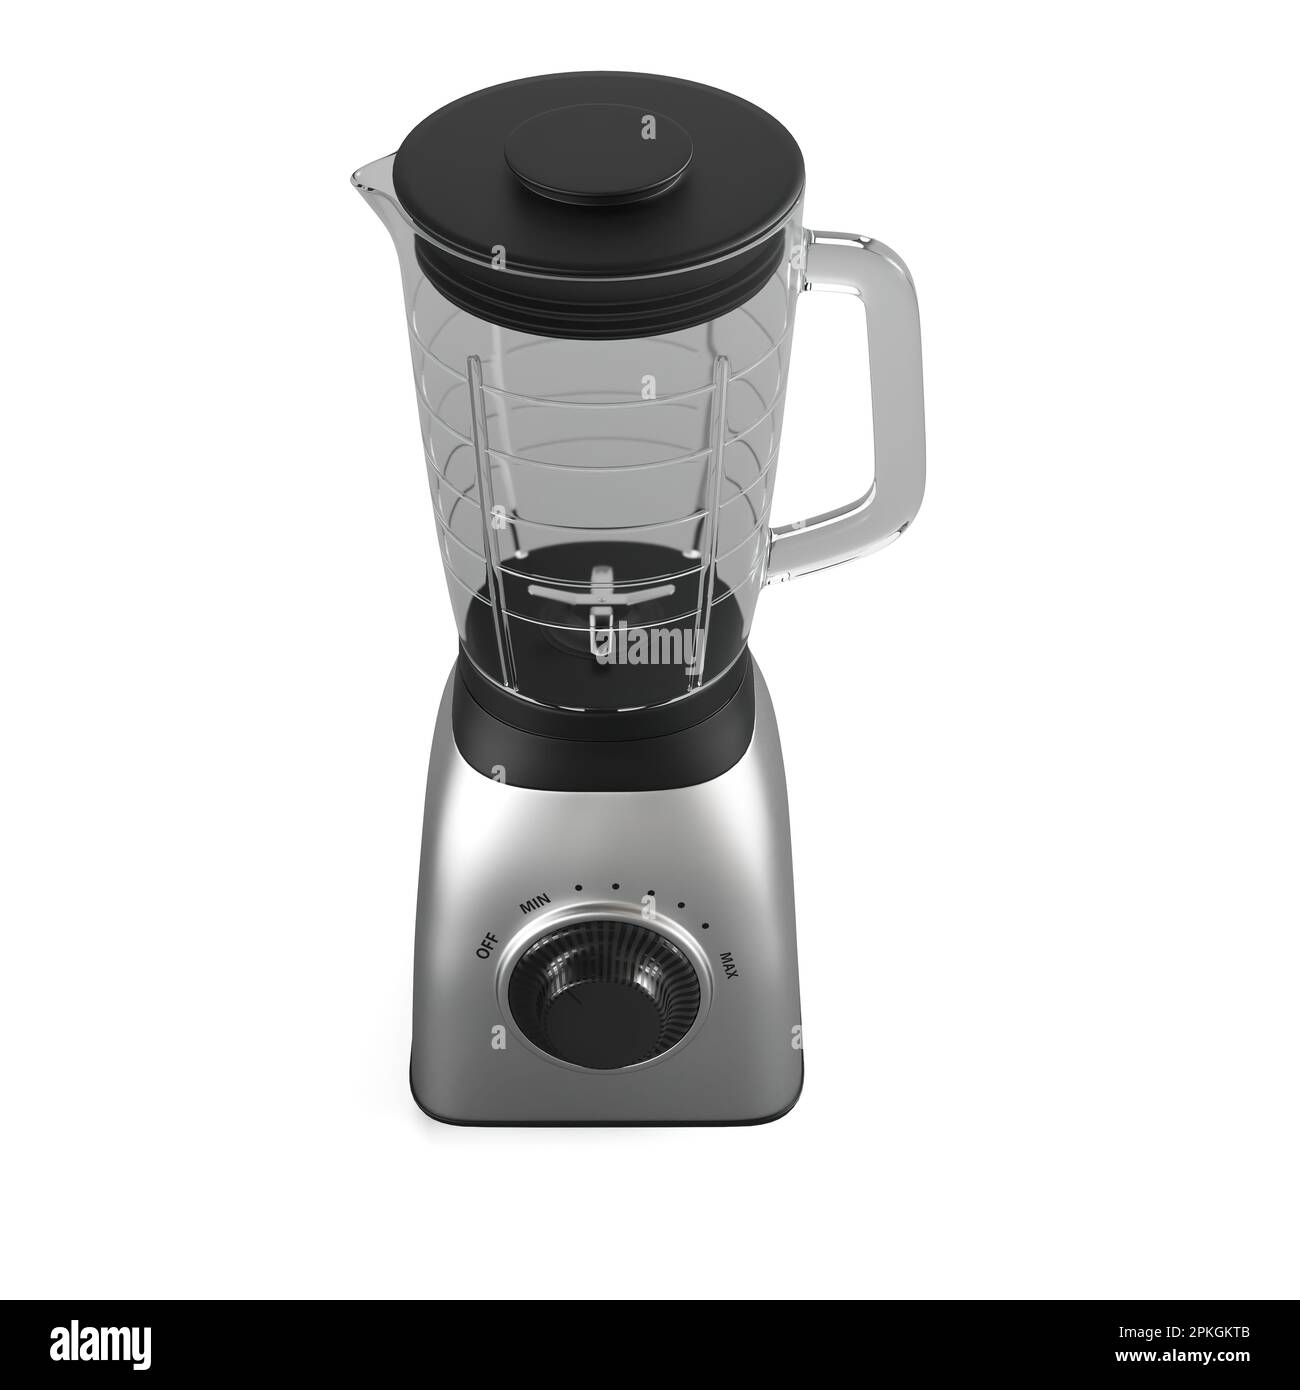 https://c8.alamy.com/comp/2PKGKTB/an-electric-blender-with-a-stainless-steel-cup-situated-on-the-top-ready-for-use-3d-rendered-2PKGKTB.jpg